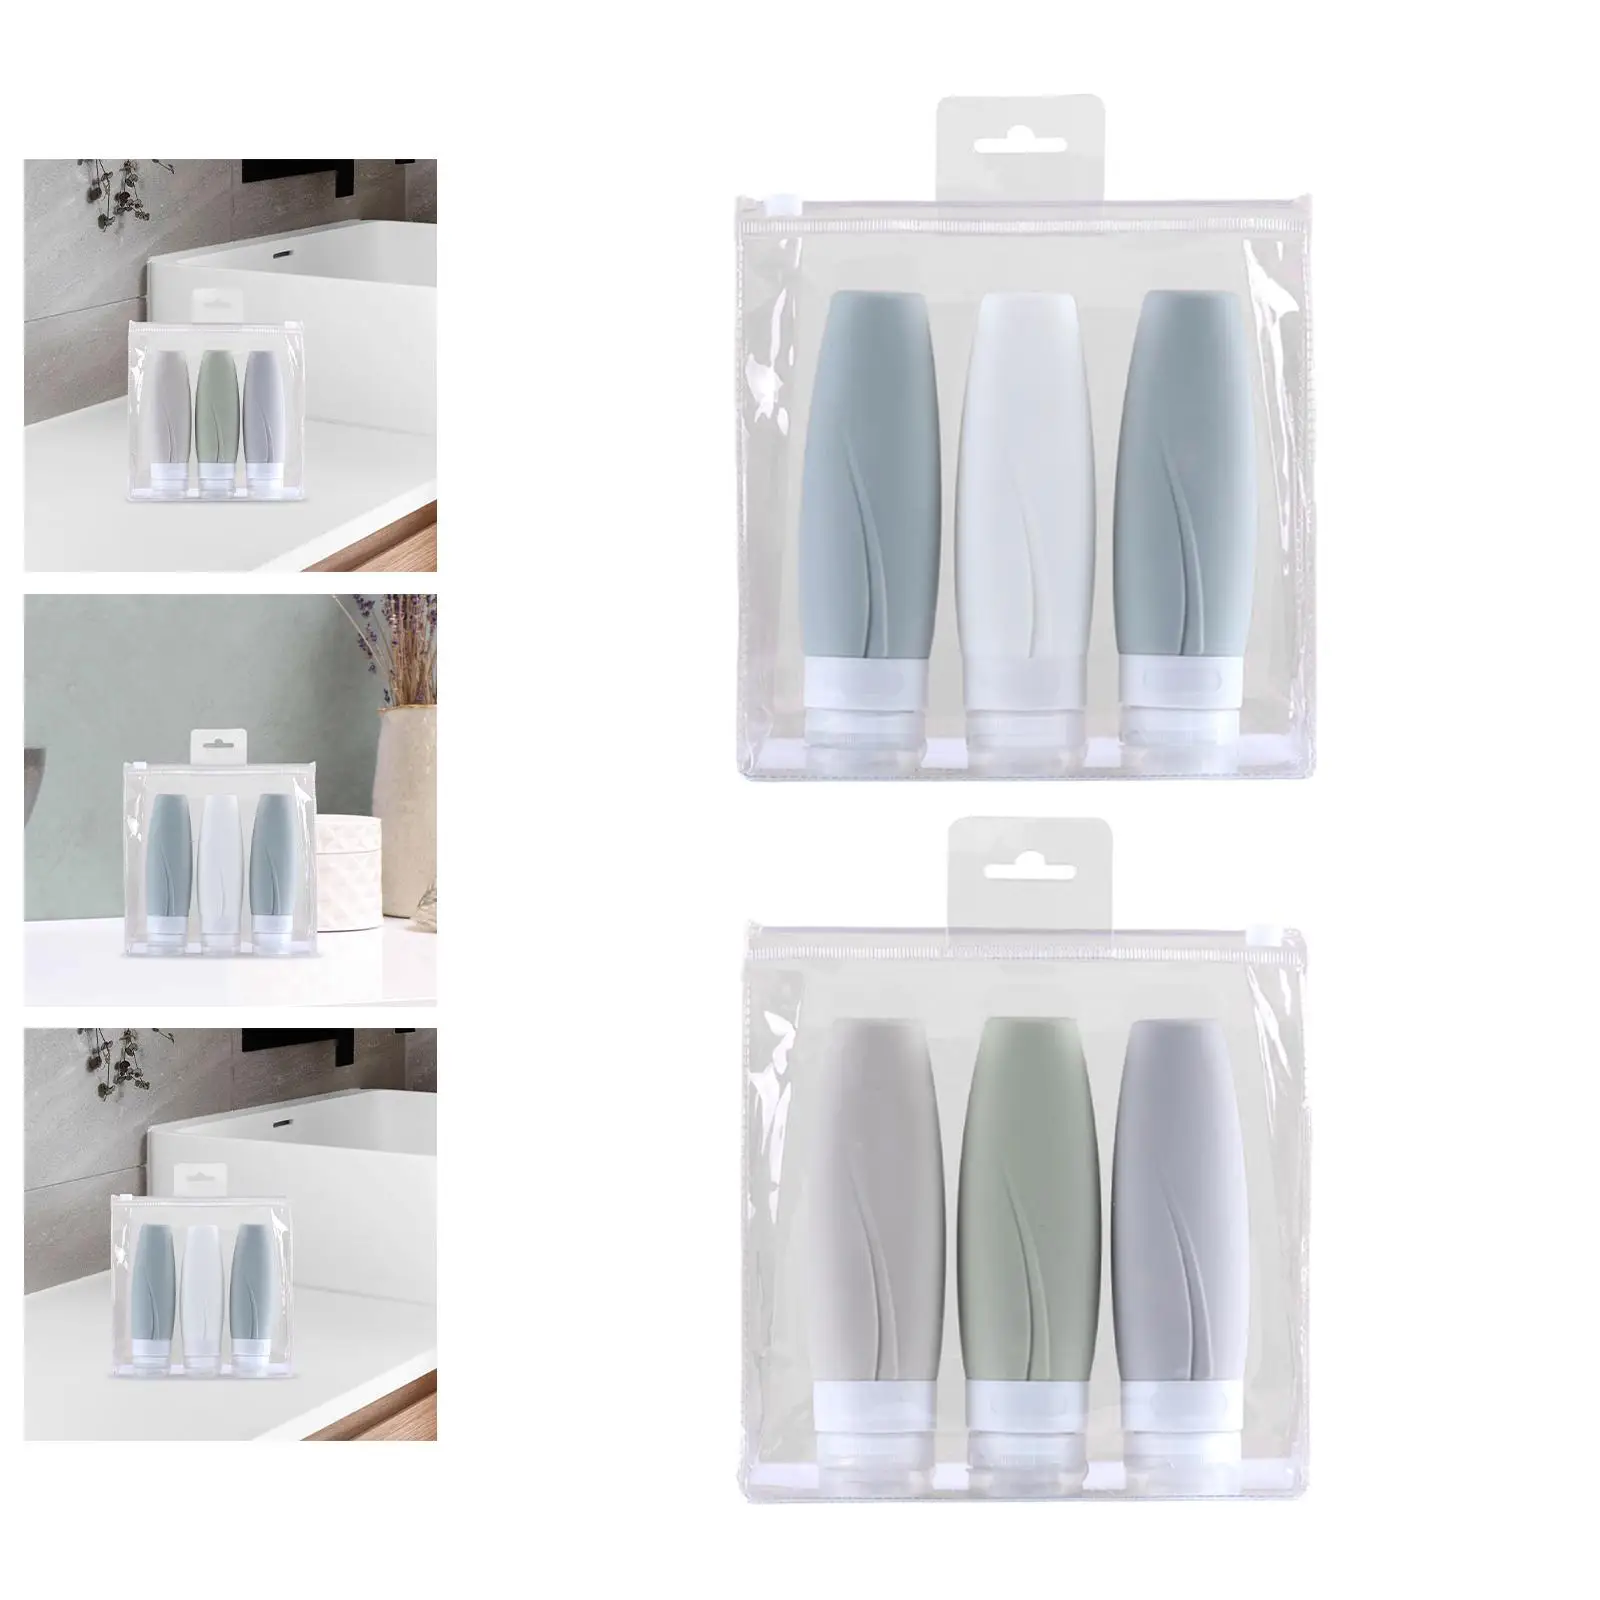 3x Travel Bottles Cosmetic Containers for Conditioner Lotion Soap Men Women